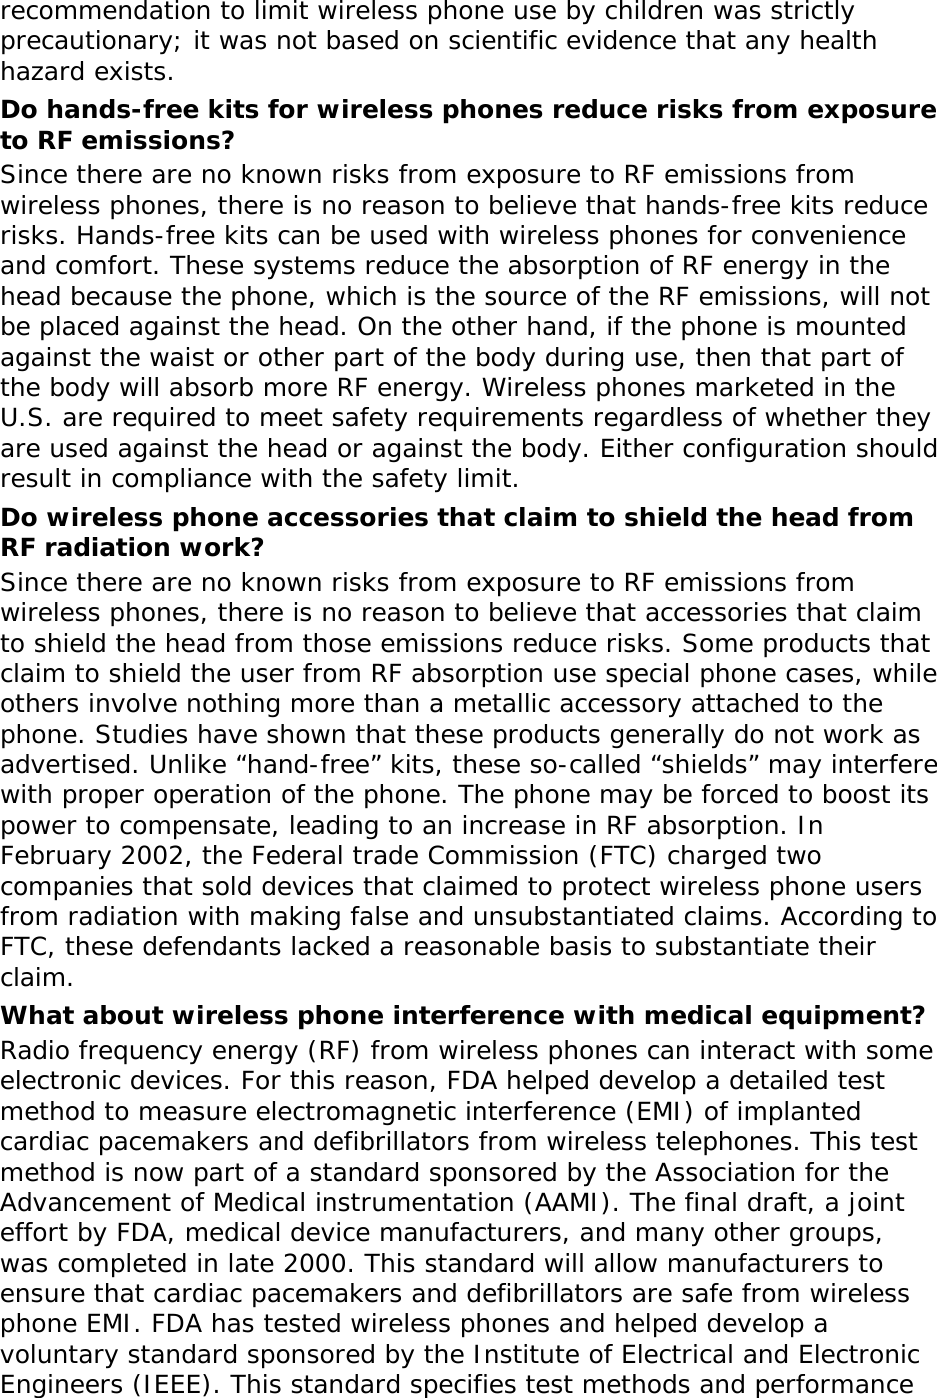 recommendation to limit wireless phone use by children was strictly precautionary; it was not based on scientific evidence that any health hazard exists.  Do hands-free kits for wireless phones reduce risks from exposure to RF emissions? Since there are no known risks from exposure to RF emissions from wireless phones, there is no reason to believe that hands-free kits reduce risks. Hands-free kits can be used with wireless phones for convenience and comfort. These systems reduce the absorption of RF energy in the head because the phone, which is the source of the RF emissions, will not be placed against the head. On the other hand, if the phone is mounted against the waist or other part of the body during use, then that part of the body will absorb more RF energy. Wireless phones marketed in the U.S. are required to meet safety requirements regardless of whether they are used against the head or against the body. Either configuration should result in compliance with the safety limit. Do wireless phone accessories that claim to shield the head from RF radiation work? Since there are no known risks from exposure to RF emissions from wireless phones, there is no reason to believe that accessories that claim to shield the head from those emissions reduce risks. Some products that claim to shield the user from RF absorption use special phone cases, while others involve nothing more than a metallic accessory attached to the phone. Studies have shown that these products generally do not work as advertised. Unlike “hand-free” kits, these so-called “shields” may interfere with proper operation of the phone. The phone may be forced to boost its power to compensate, leading to an increase in RF absorption. In February 2002, the Federal trade Commission (FTC) charged two companies that sold devices that claimed to protect wireless phone users from radiation with making false and unsubstantiated claims. According to FTC, these defendants lacked a reasonable basis to substantiate their claim. What about wireless phone interference with medical equipment? Radio frequency energy (RF) from wireless phones can interact with some electronic devices. For this reason, FDA helped develop a detailed test method to measure electromagnetic interference (EMI) of implanted cardiac pacemakers and defibrillators from wireless telephones. This test method is now part of a standard sponsored by the Association for the Advancement of Medical instrumentation (AAMI). The final draft, a joint effort by FDA, medical device manufacturers, and many other groups, was completed in late 2000. This standard will allow manufacturers to ensure that cardiac pacemakers and defibrillators are safe from wireless phone EMI. FDA has tested wireless phones and helped develop a voluntary standard sponsored by the Institute of Electrical and Electronic Engineers (IEEE). This standard specifies test methods and performance 